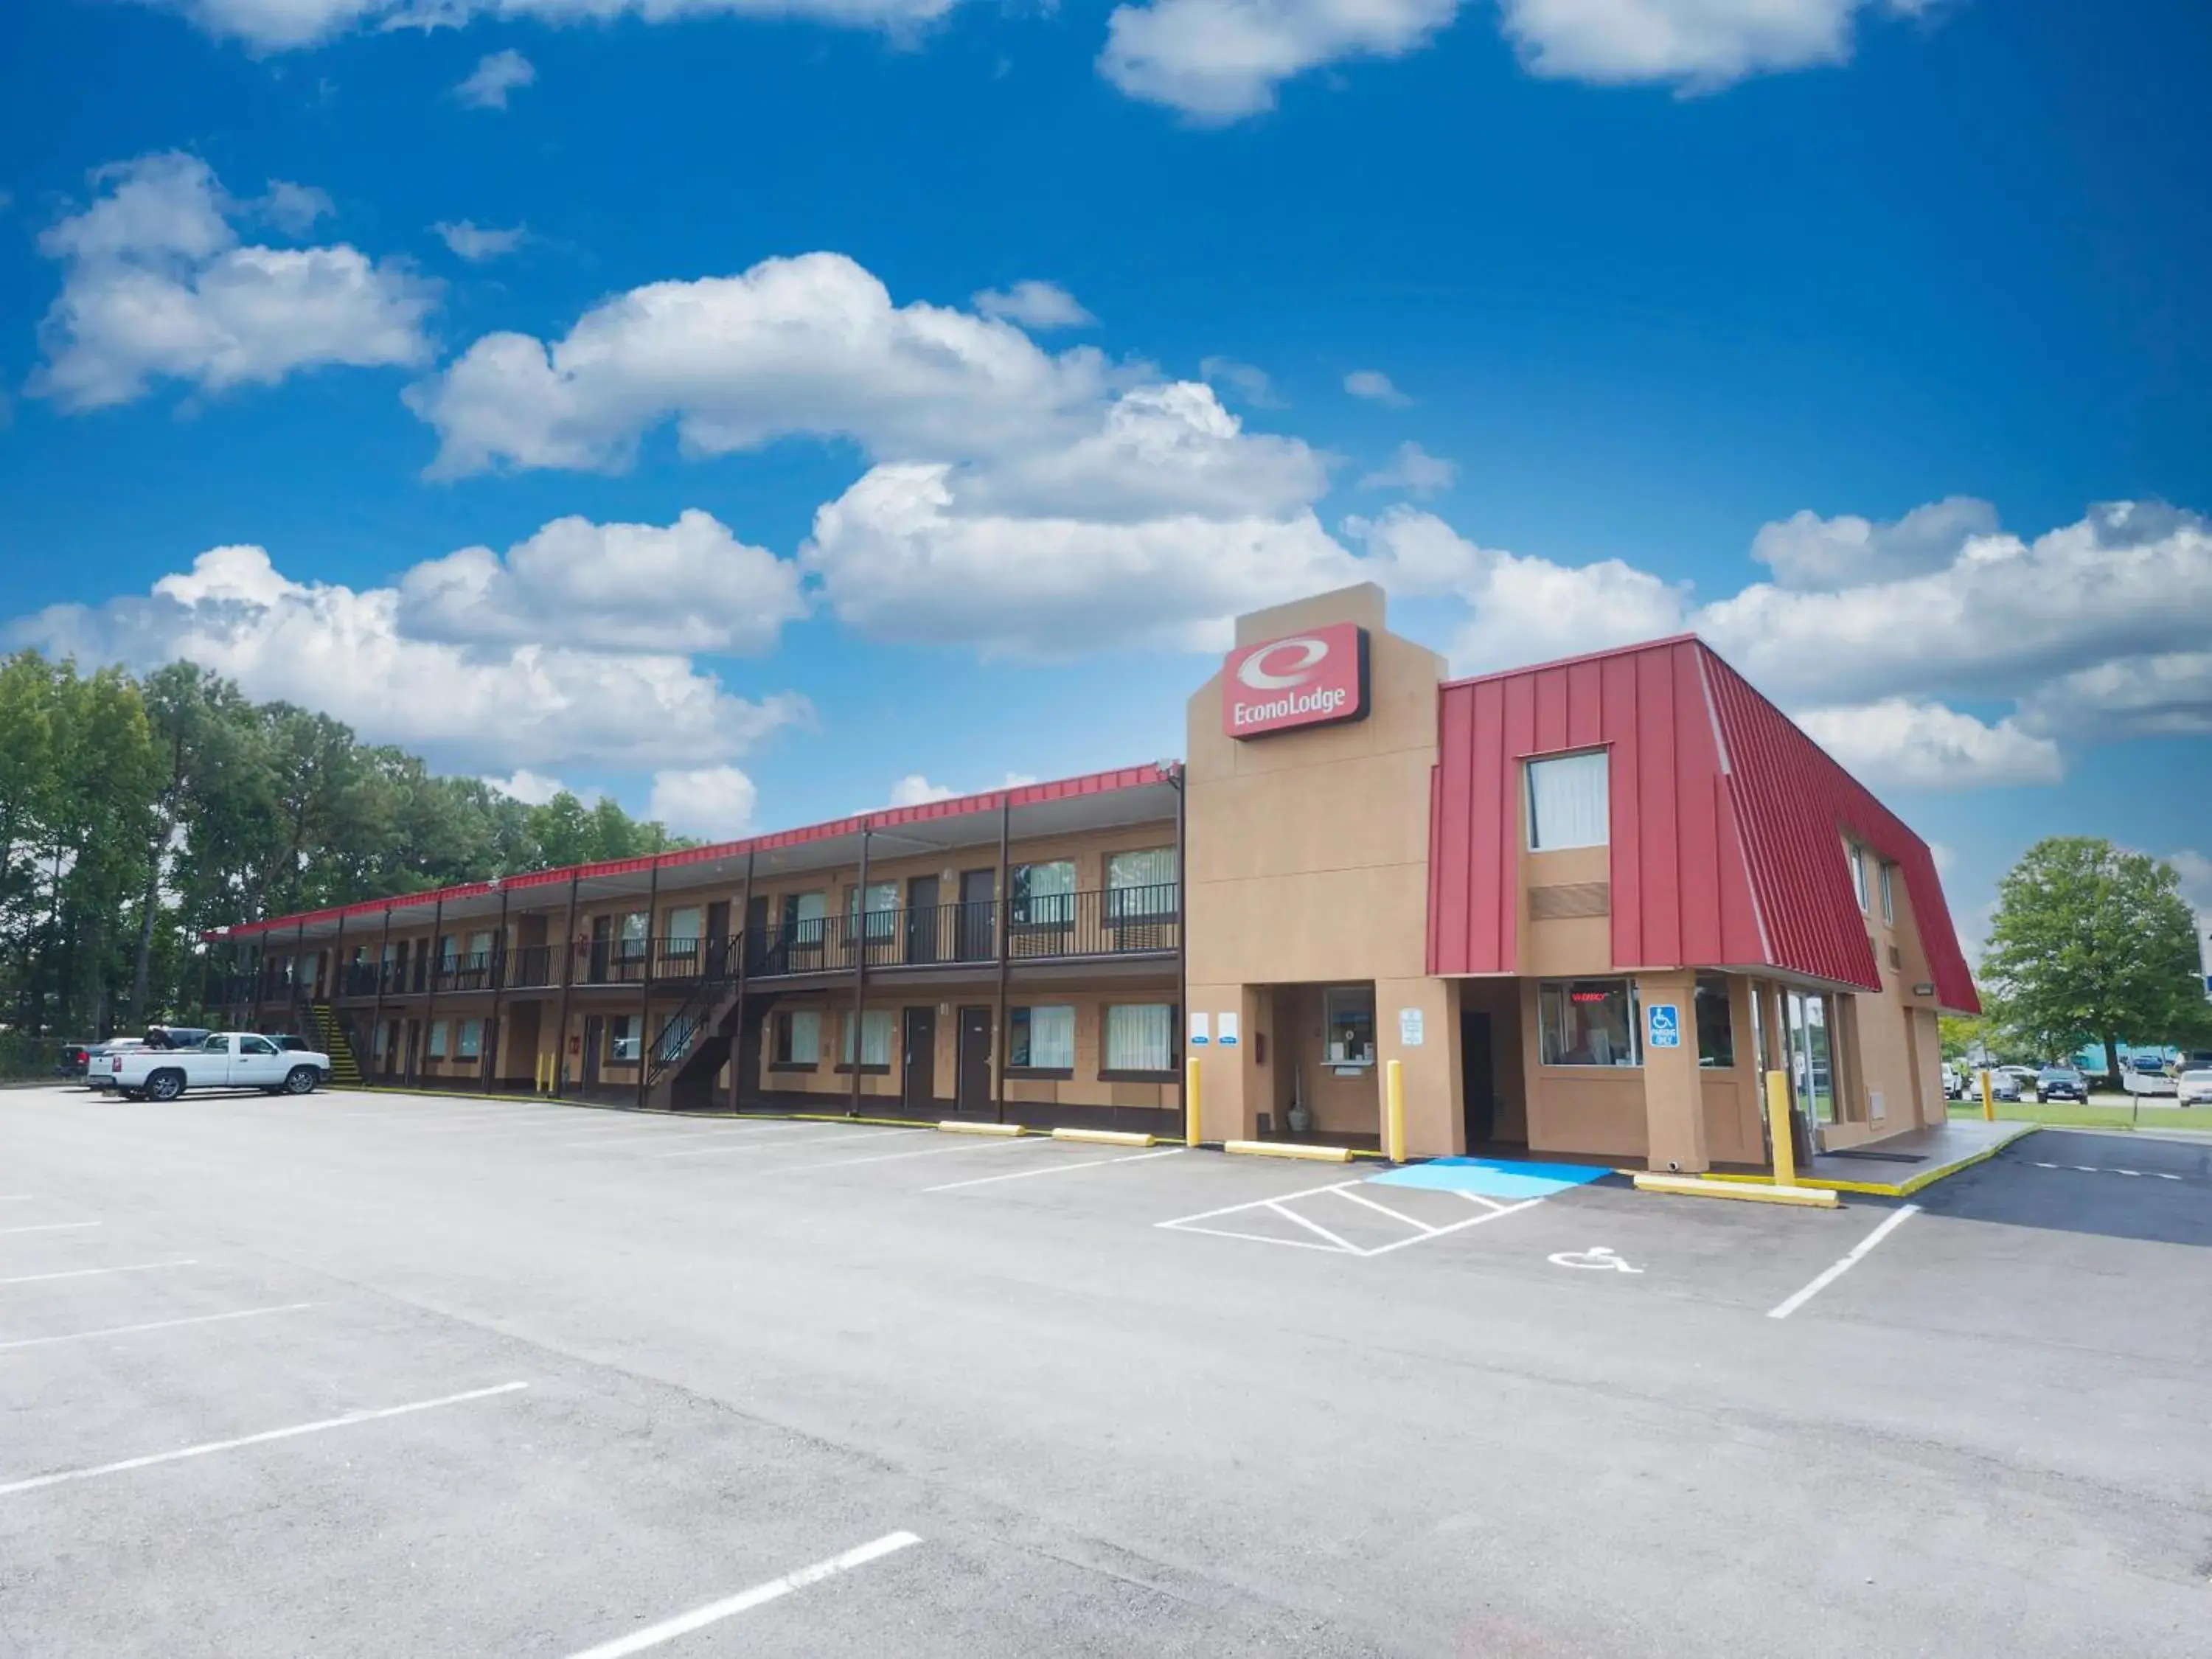 Property Building in Econo Lodge Town Center